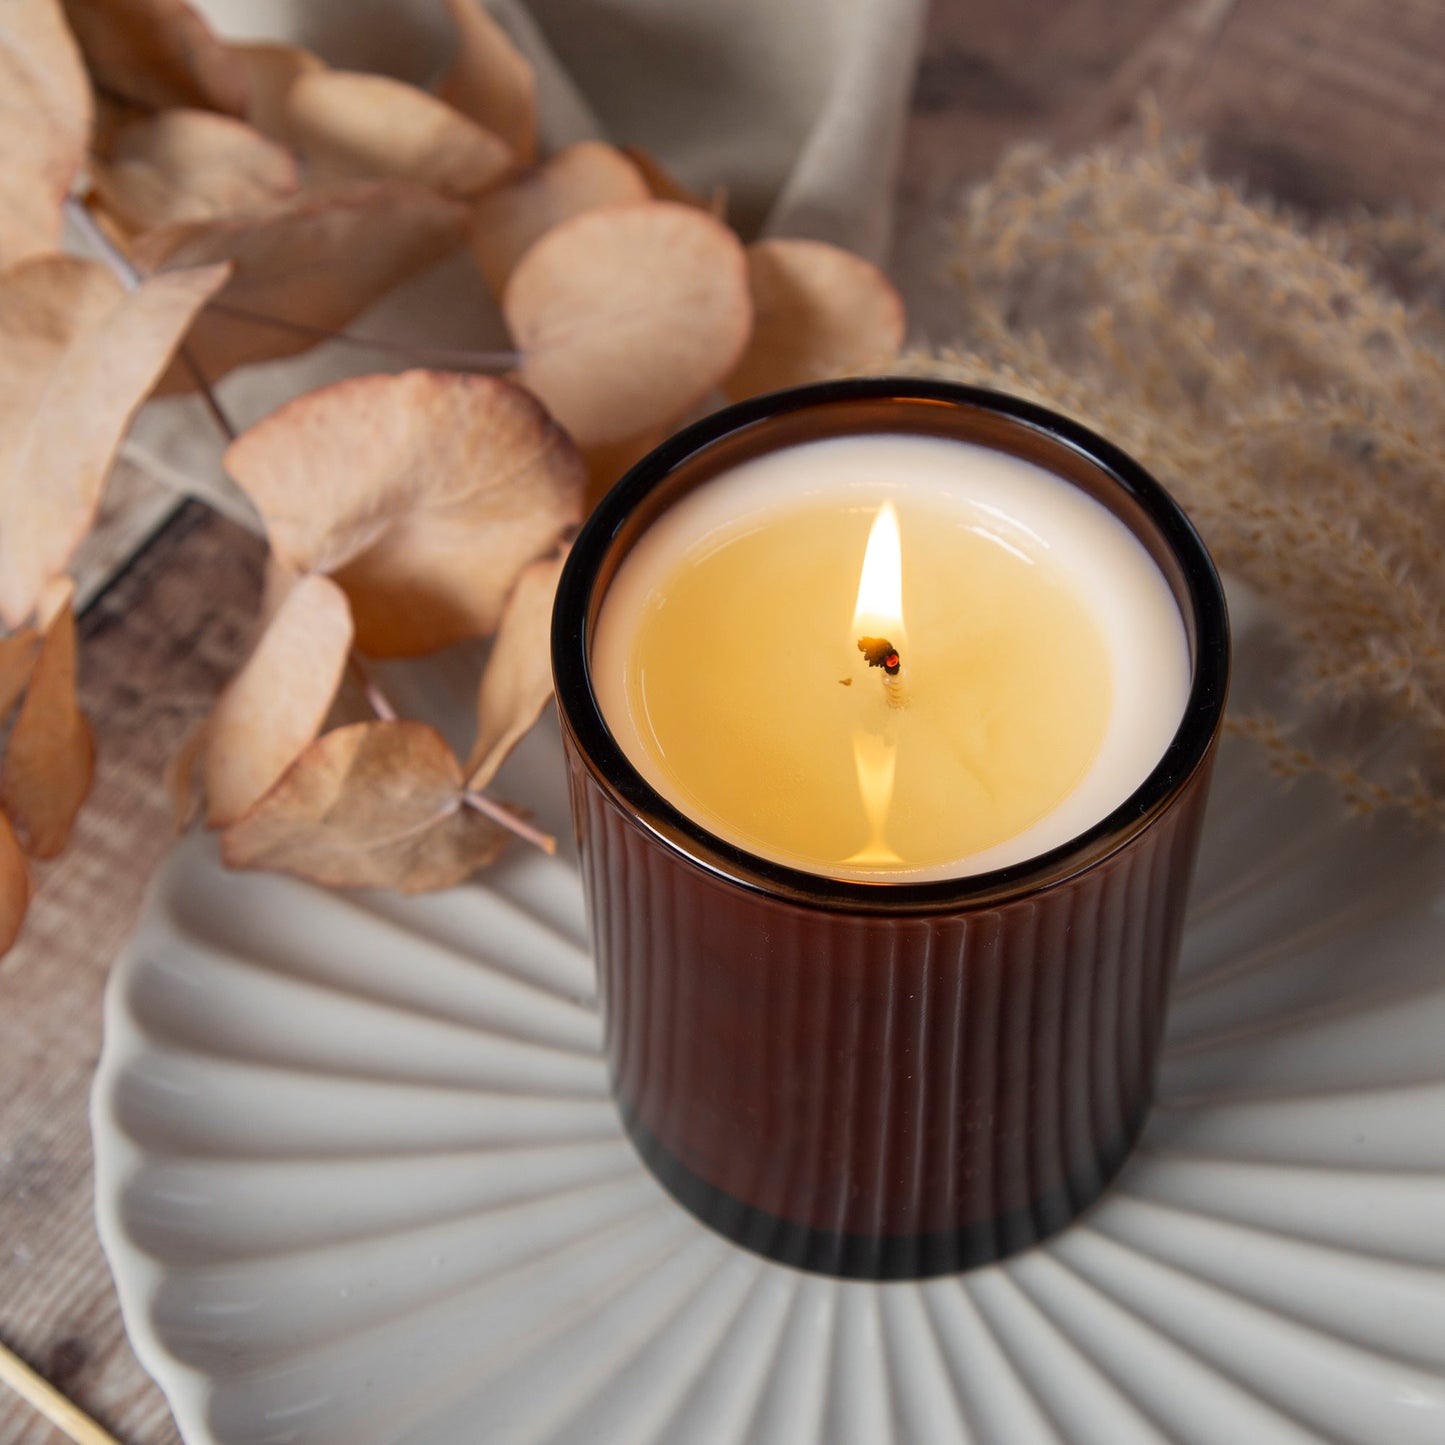 Christmas Gift For Family Enchanted Amber Candle